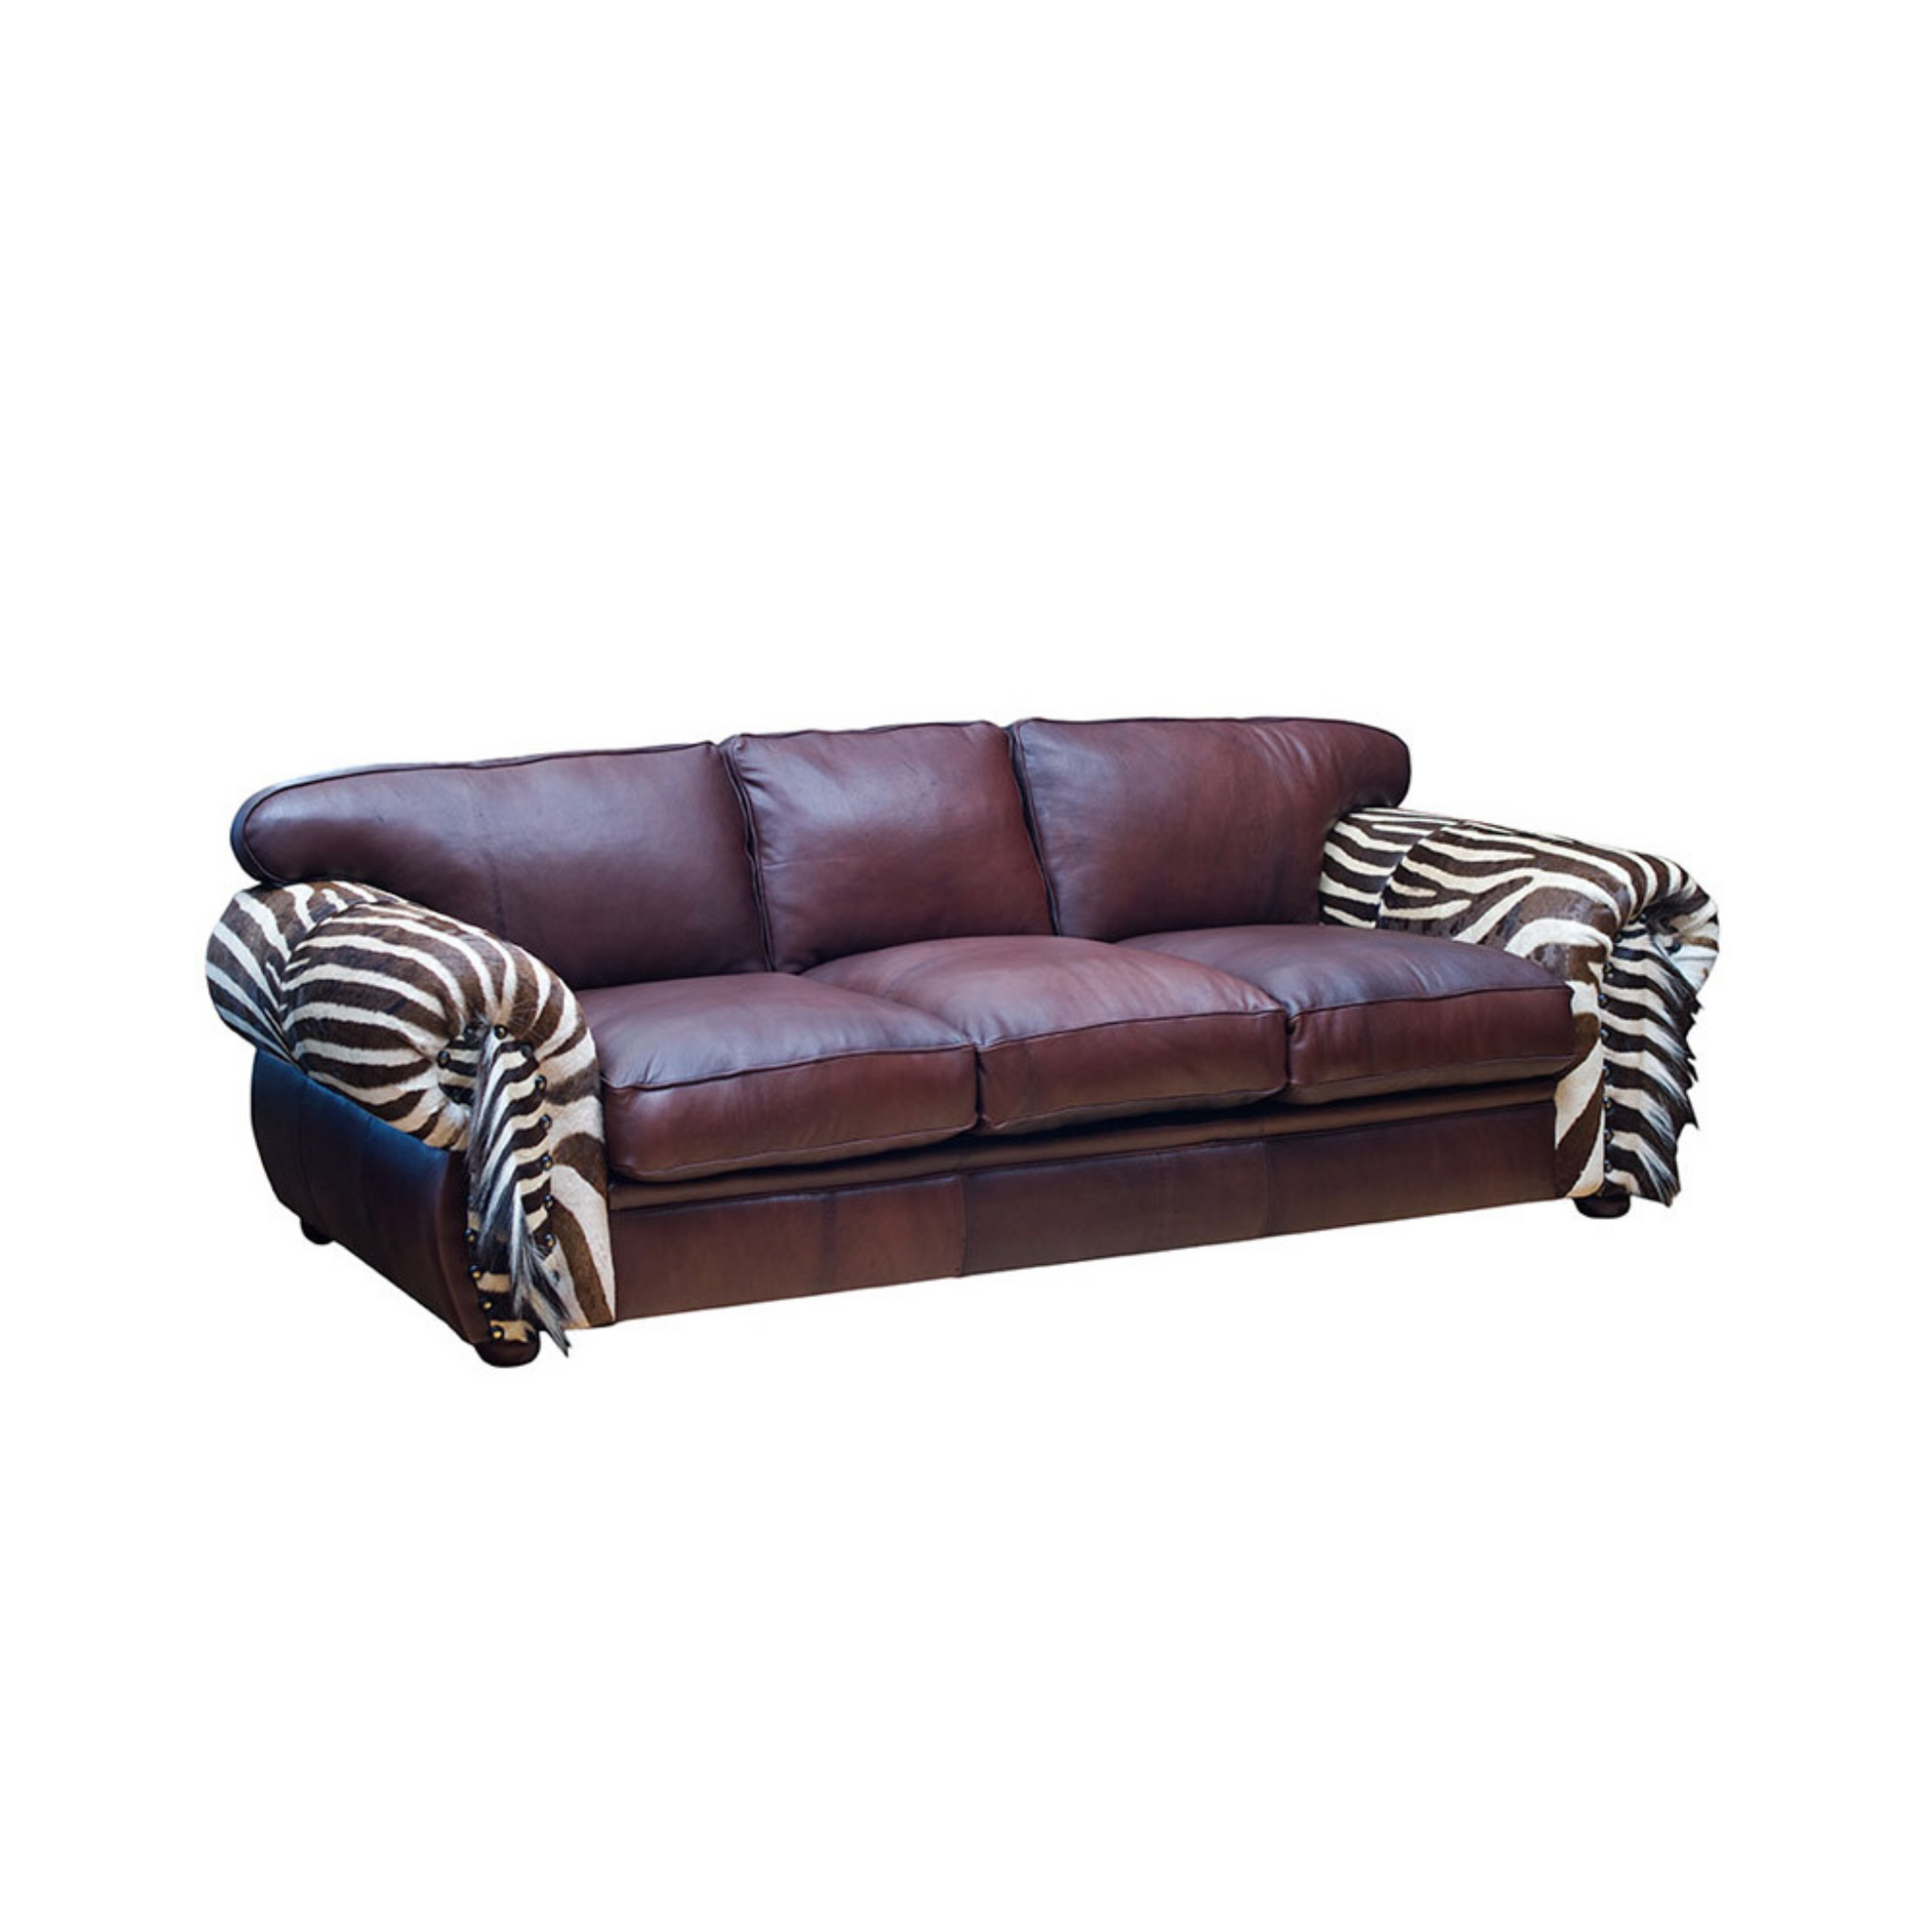 African Lodge Sofa in Burchell Zebra and Kudu Leather – Experience the essence of Africa with our African Lodge sofa, beautifully upholstered in Burchell Zebra and Kudu Leather. Transport the spirit of the wild to your living space.  International export of Burchell Zebra hides is available. Customize the sofa with your preferred sizes and materials, bringing a touch of African elegance to your home.